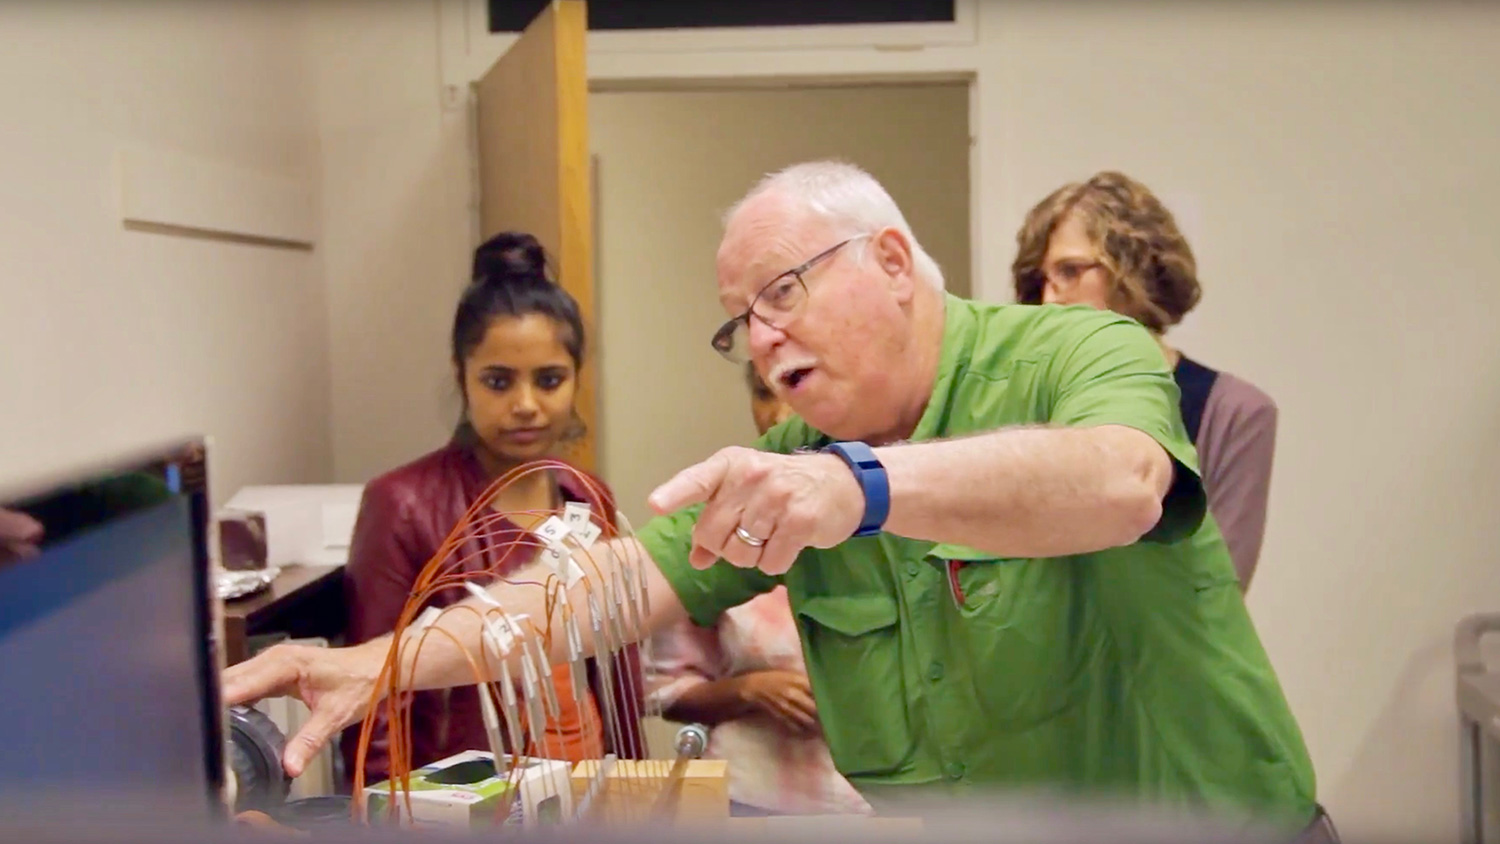 Tom Banks working with students in a lab